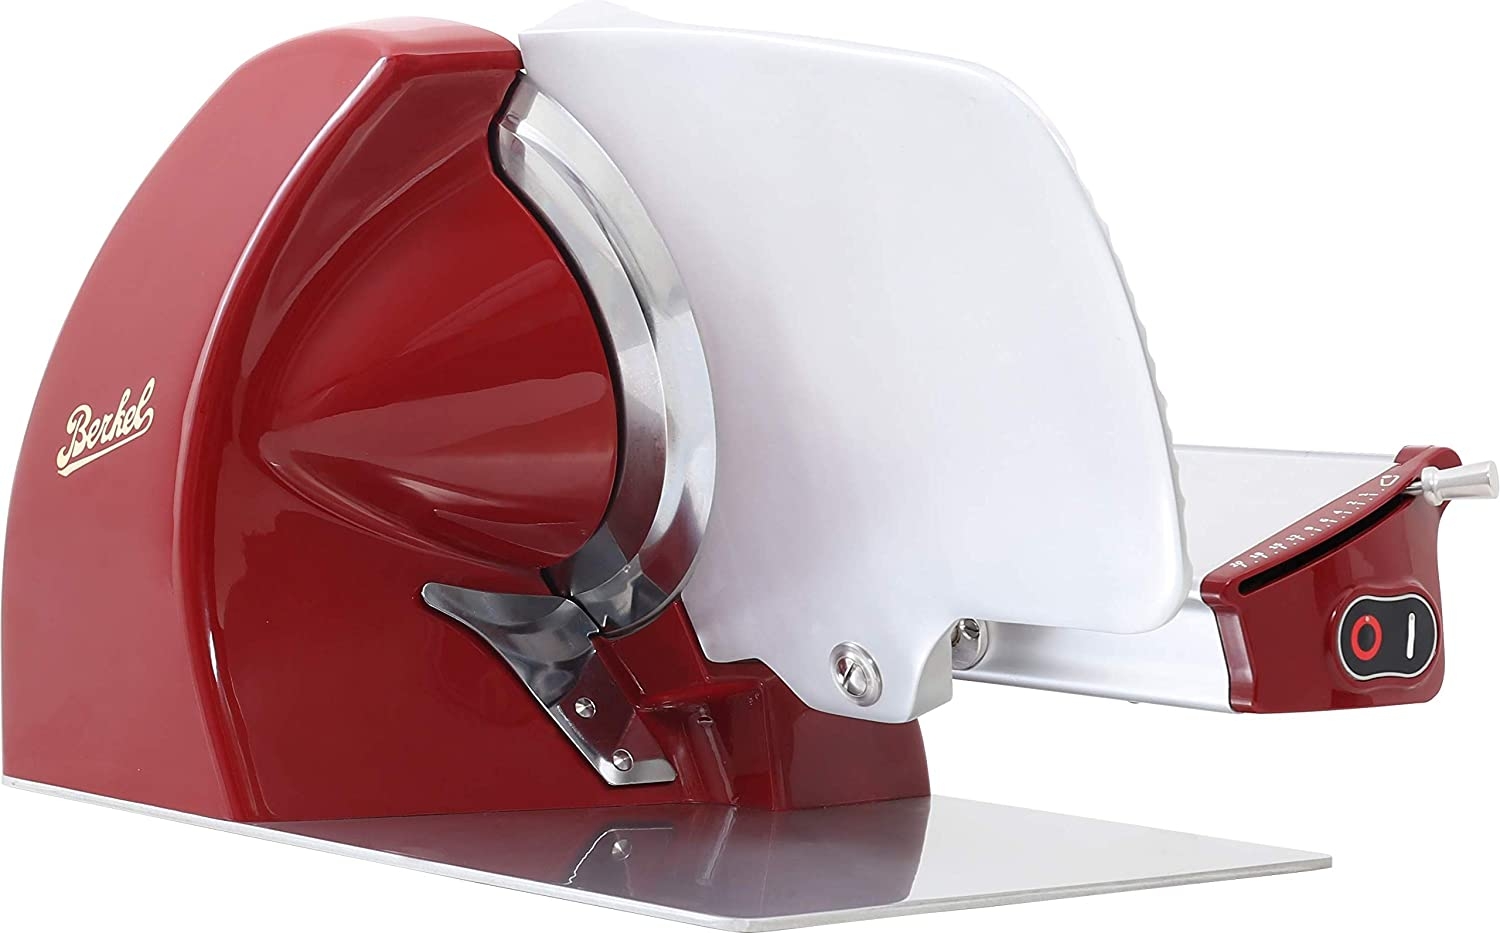 Berkel Home Line 250 Food Slicer/Red/10″ Blade/Electric Food Slicer/Slices Prosciutto, Meat, Cold Cuts, Fish, Ham, Cheese,